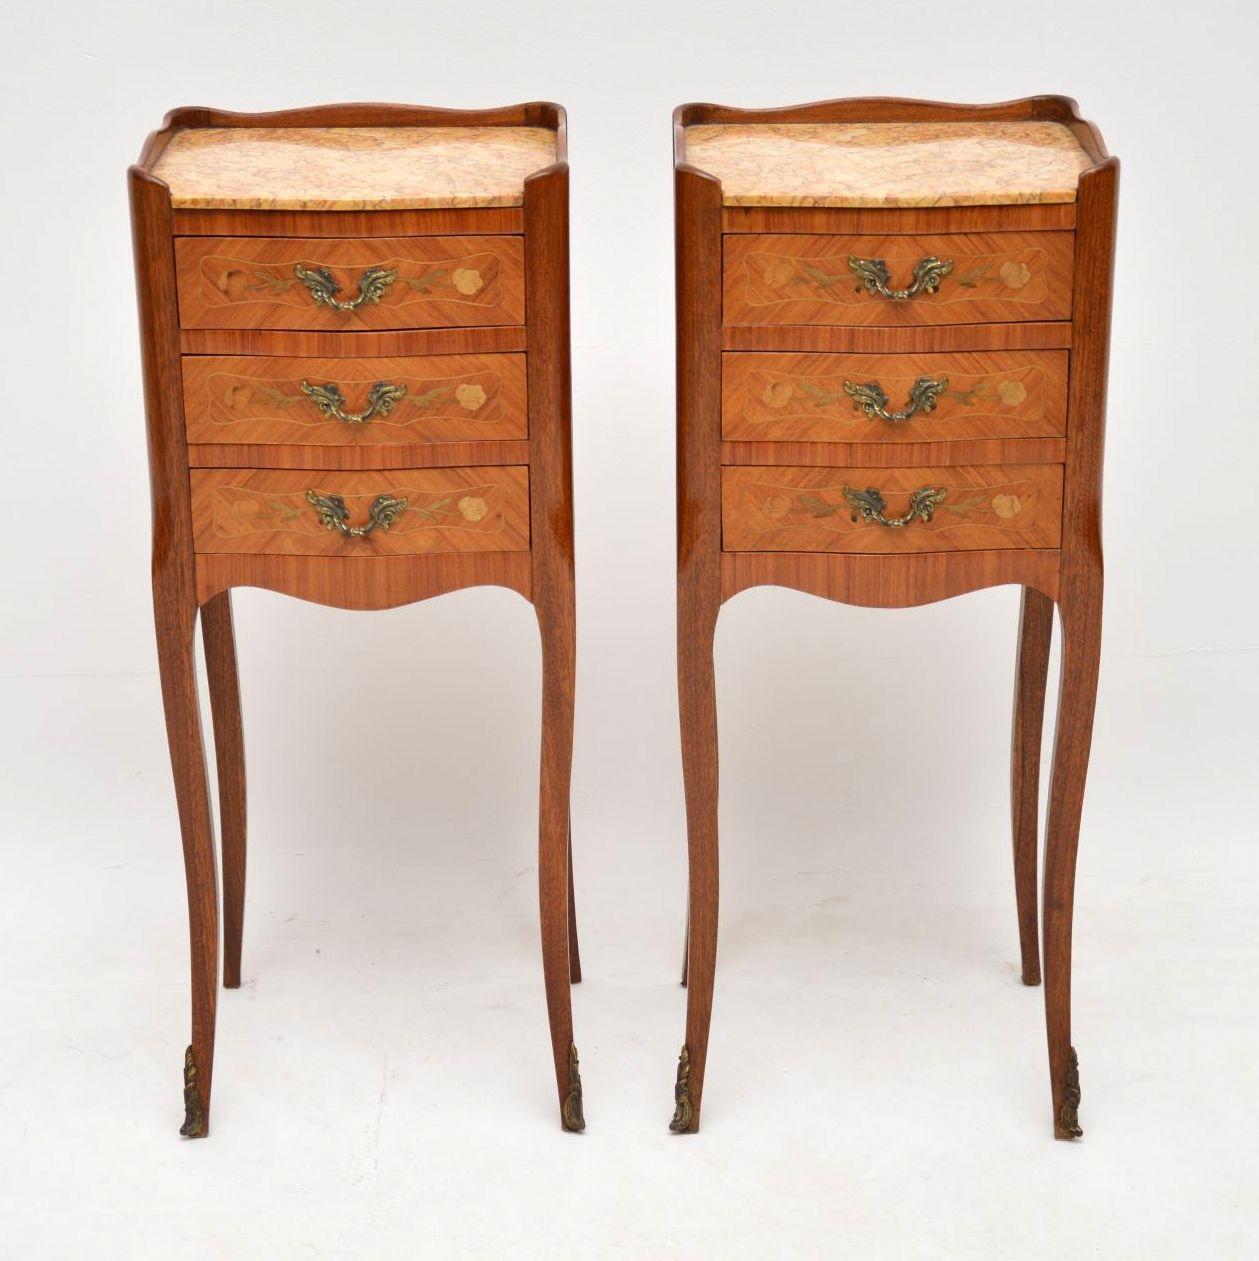 Pair of slim antique French marble-top bedside or lamp tables in kingwood and with some lovely floral marquetry on the drawers, which have original handles. They are in excellent condition, dating from circa 1910 period and have just been